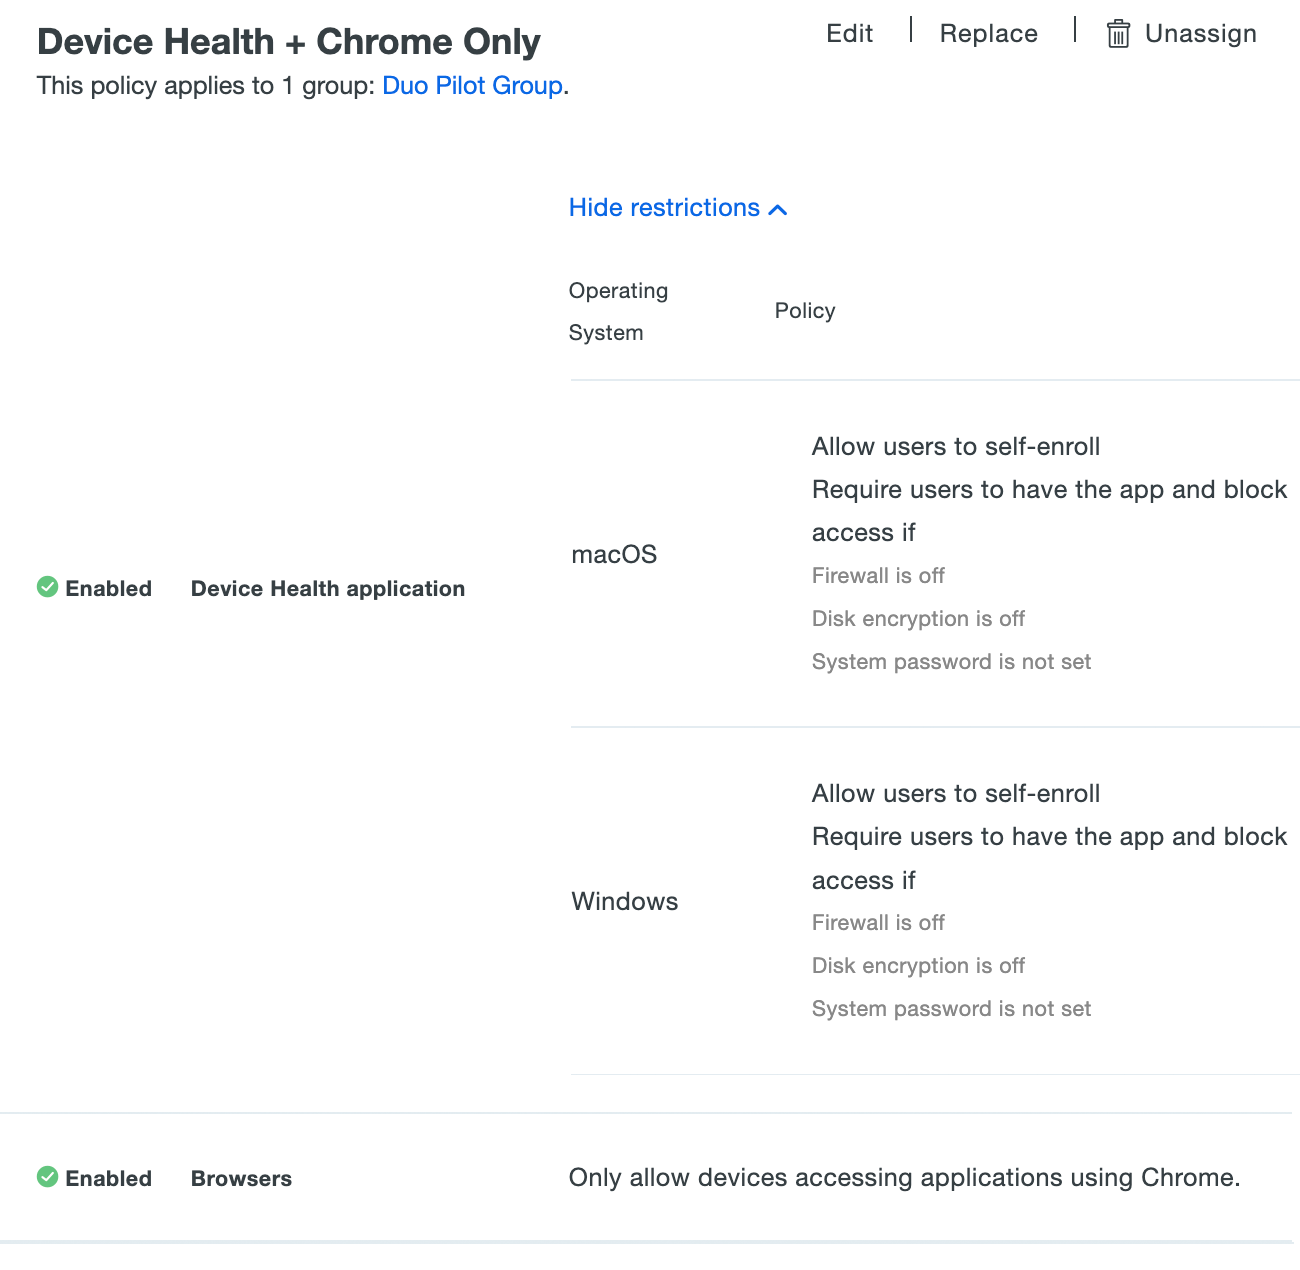 Device Health Application and Browser Policy